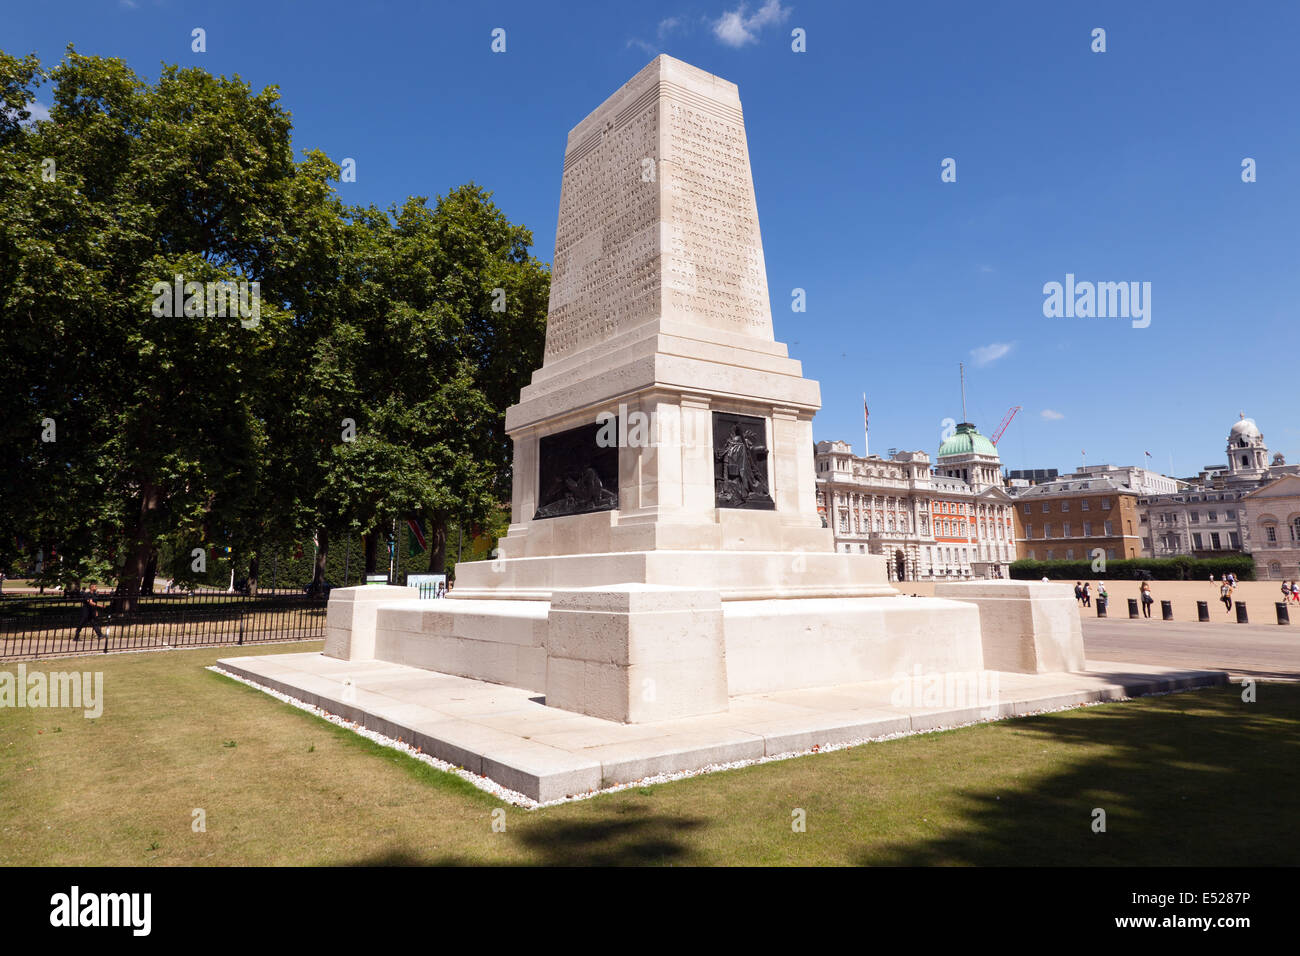 Wide-angle view  of the Guards Memorial, Horse Guards Parade, London. Stock Photo